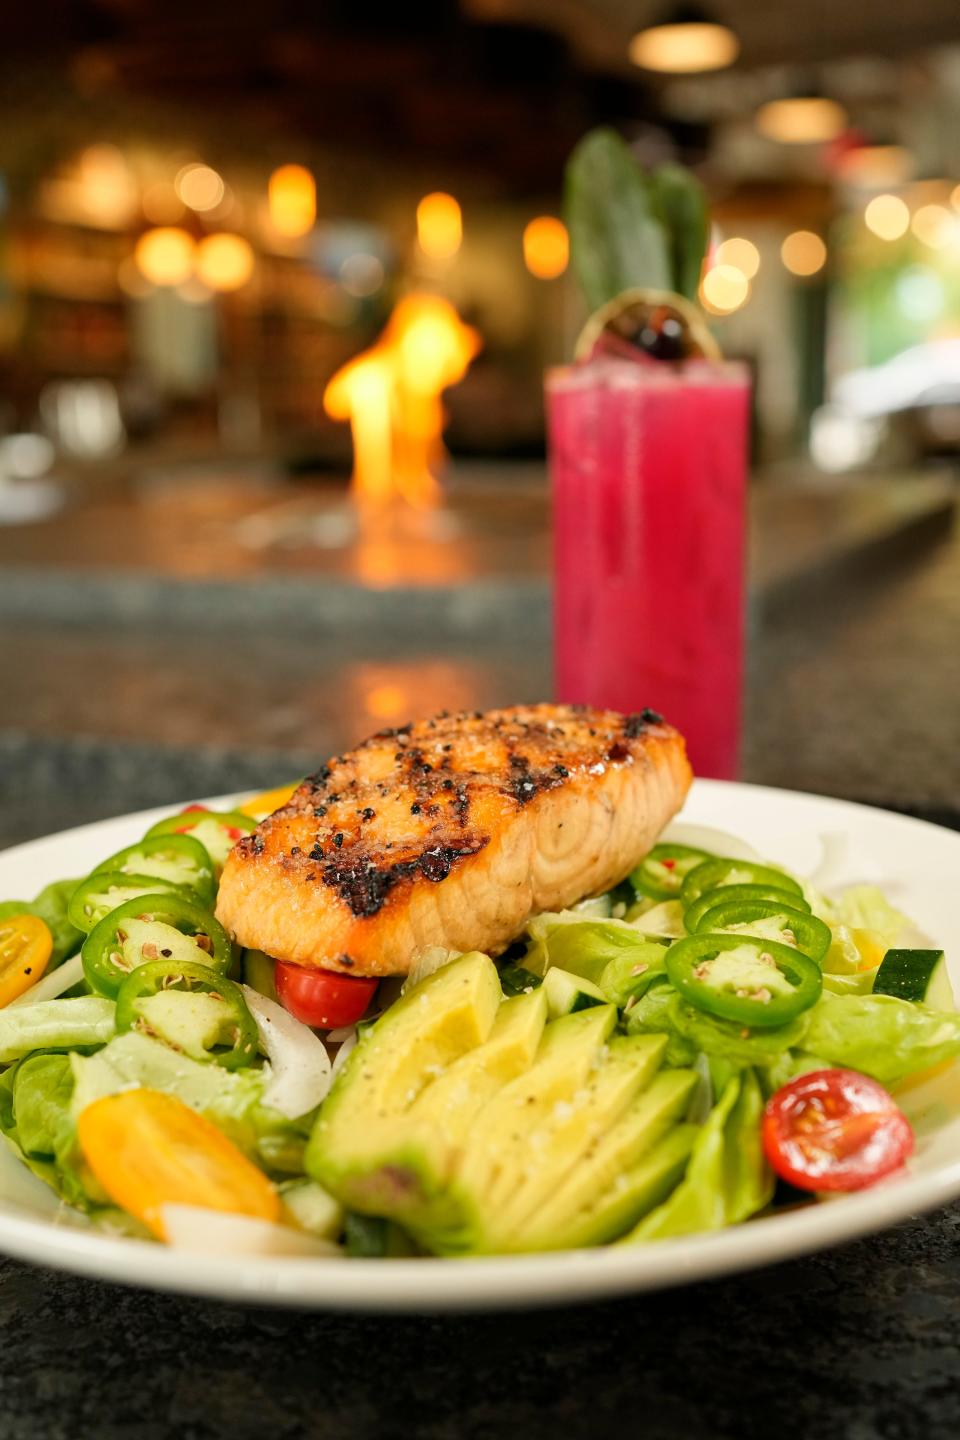 An Island Salad with grilled salmon and a Beet Daze cocktail from Kona Craft Kitchen